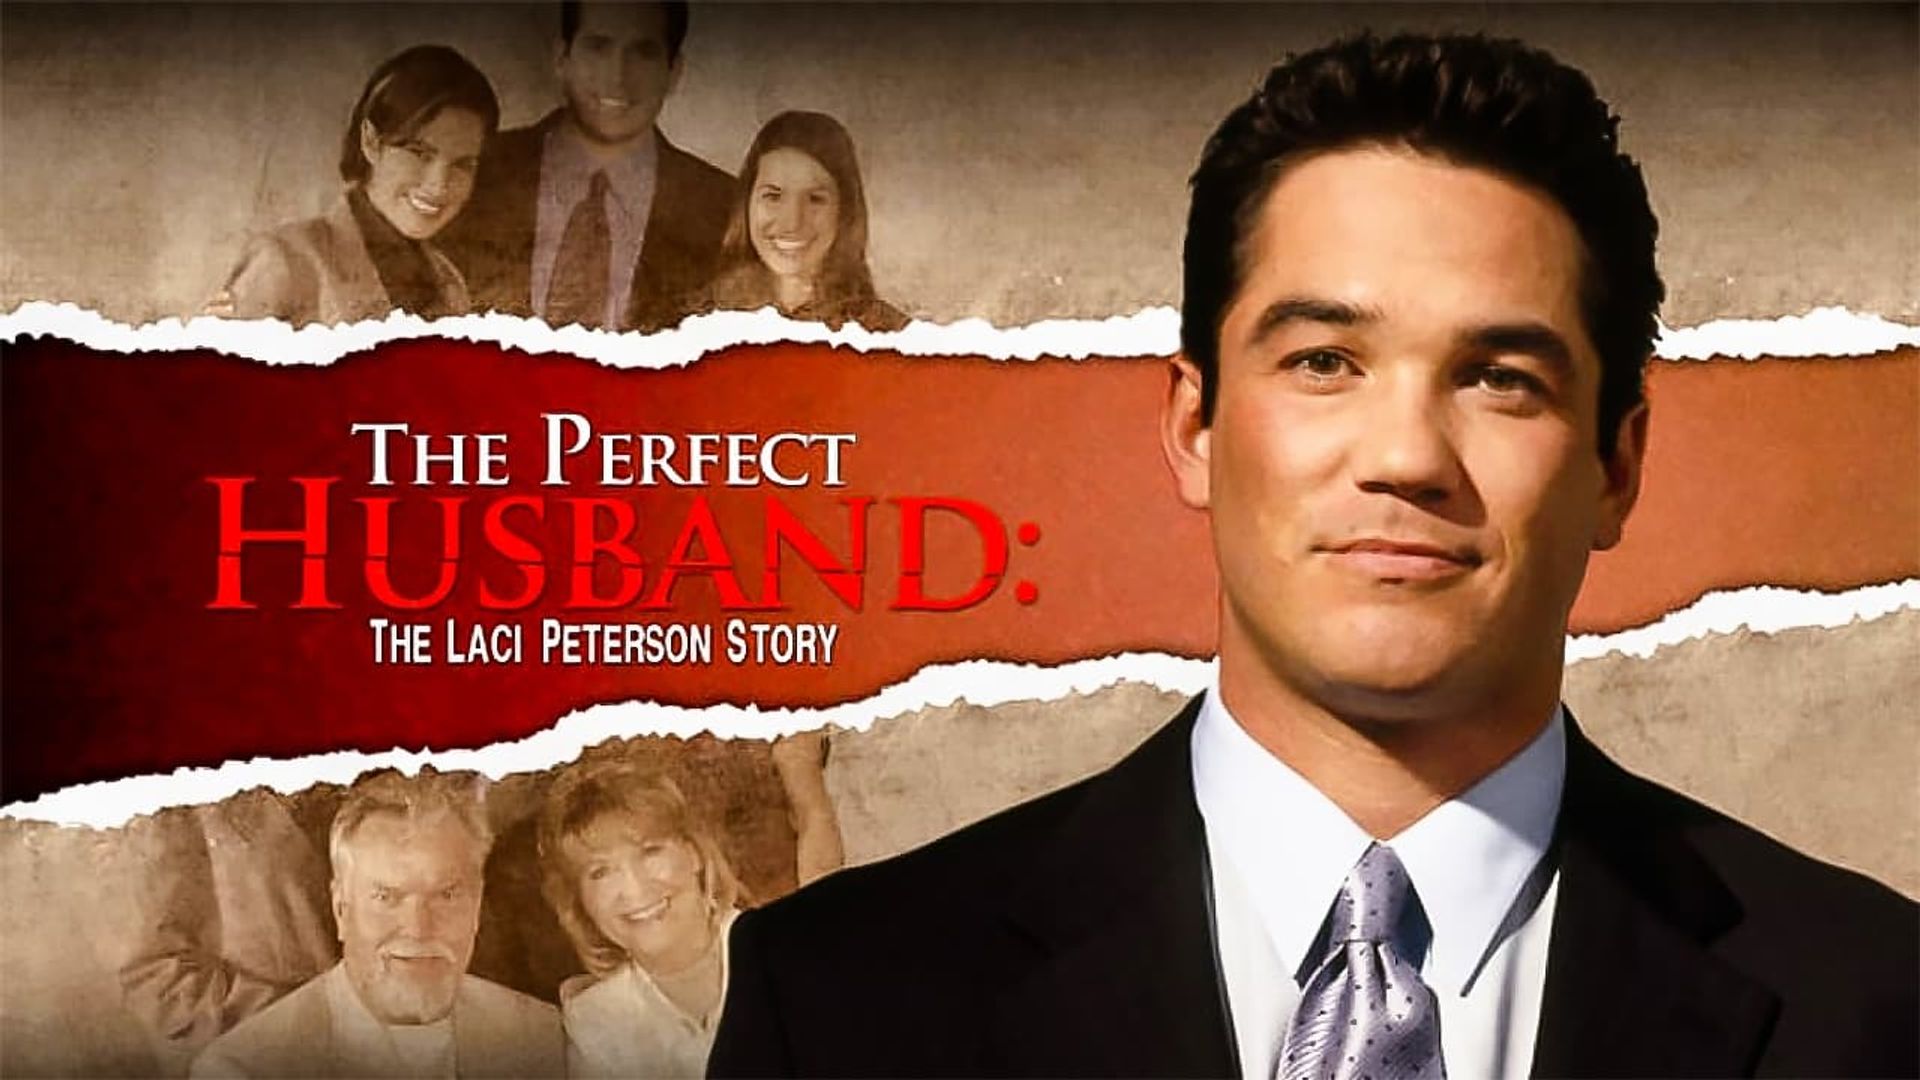 The Perfect Husband: The Laci Peterson Story background